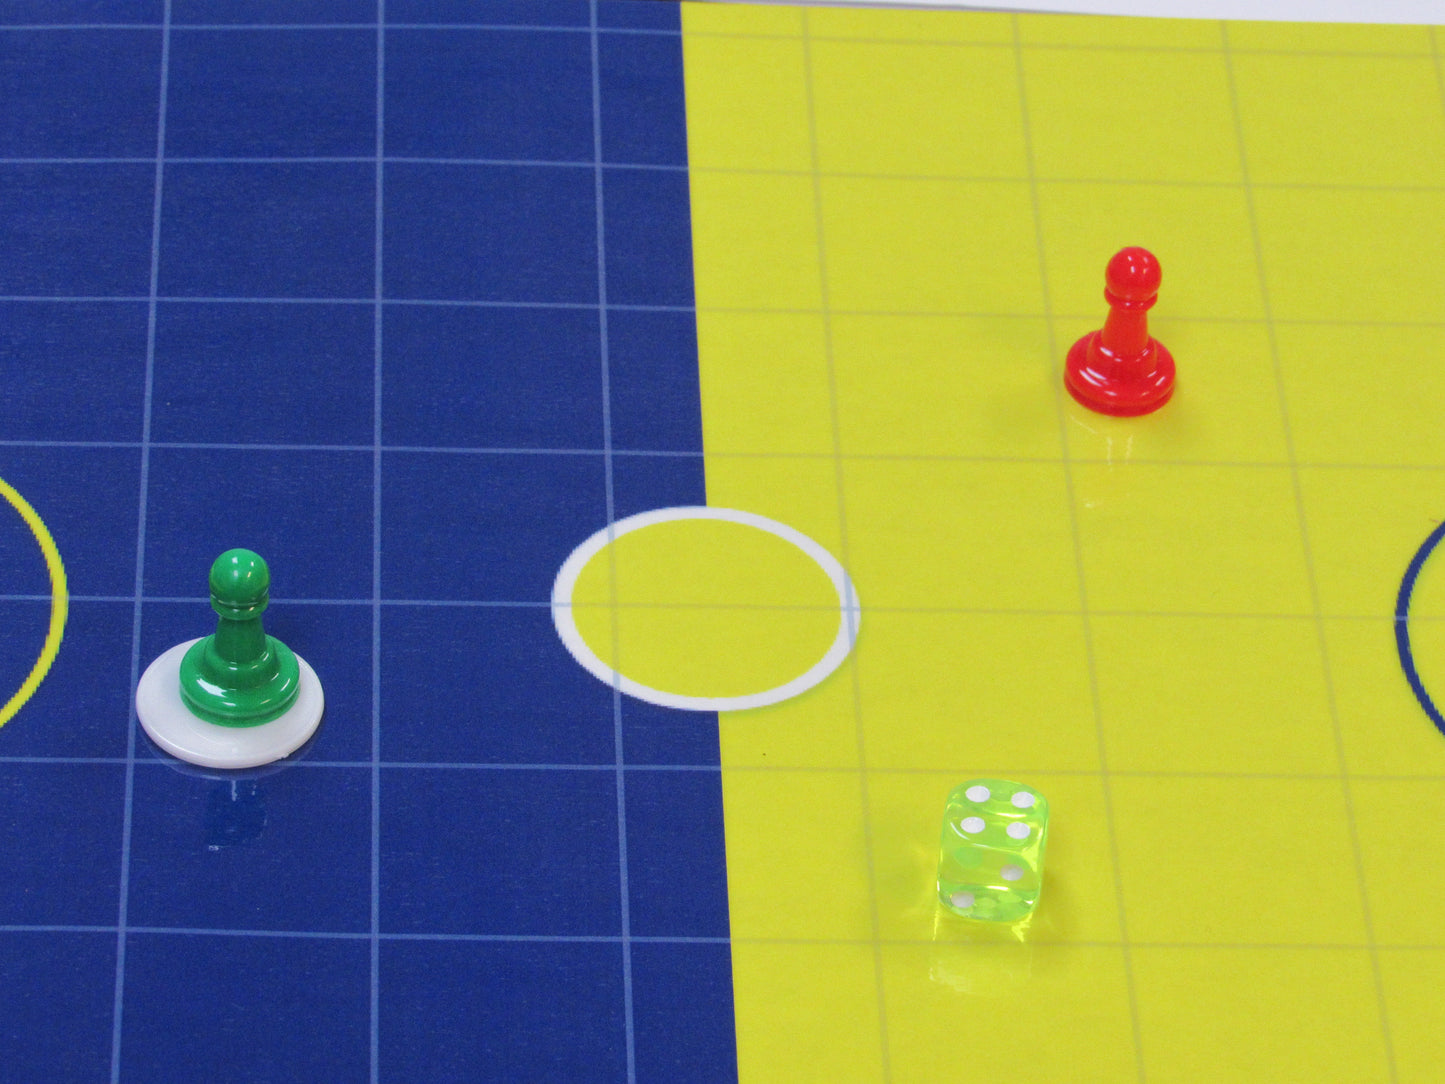 Xtreme Color-Board Soccer Game